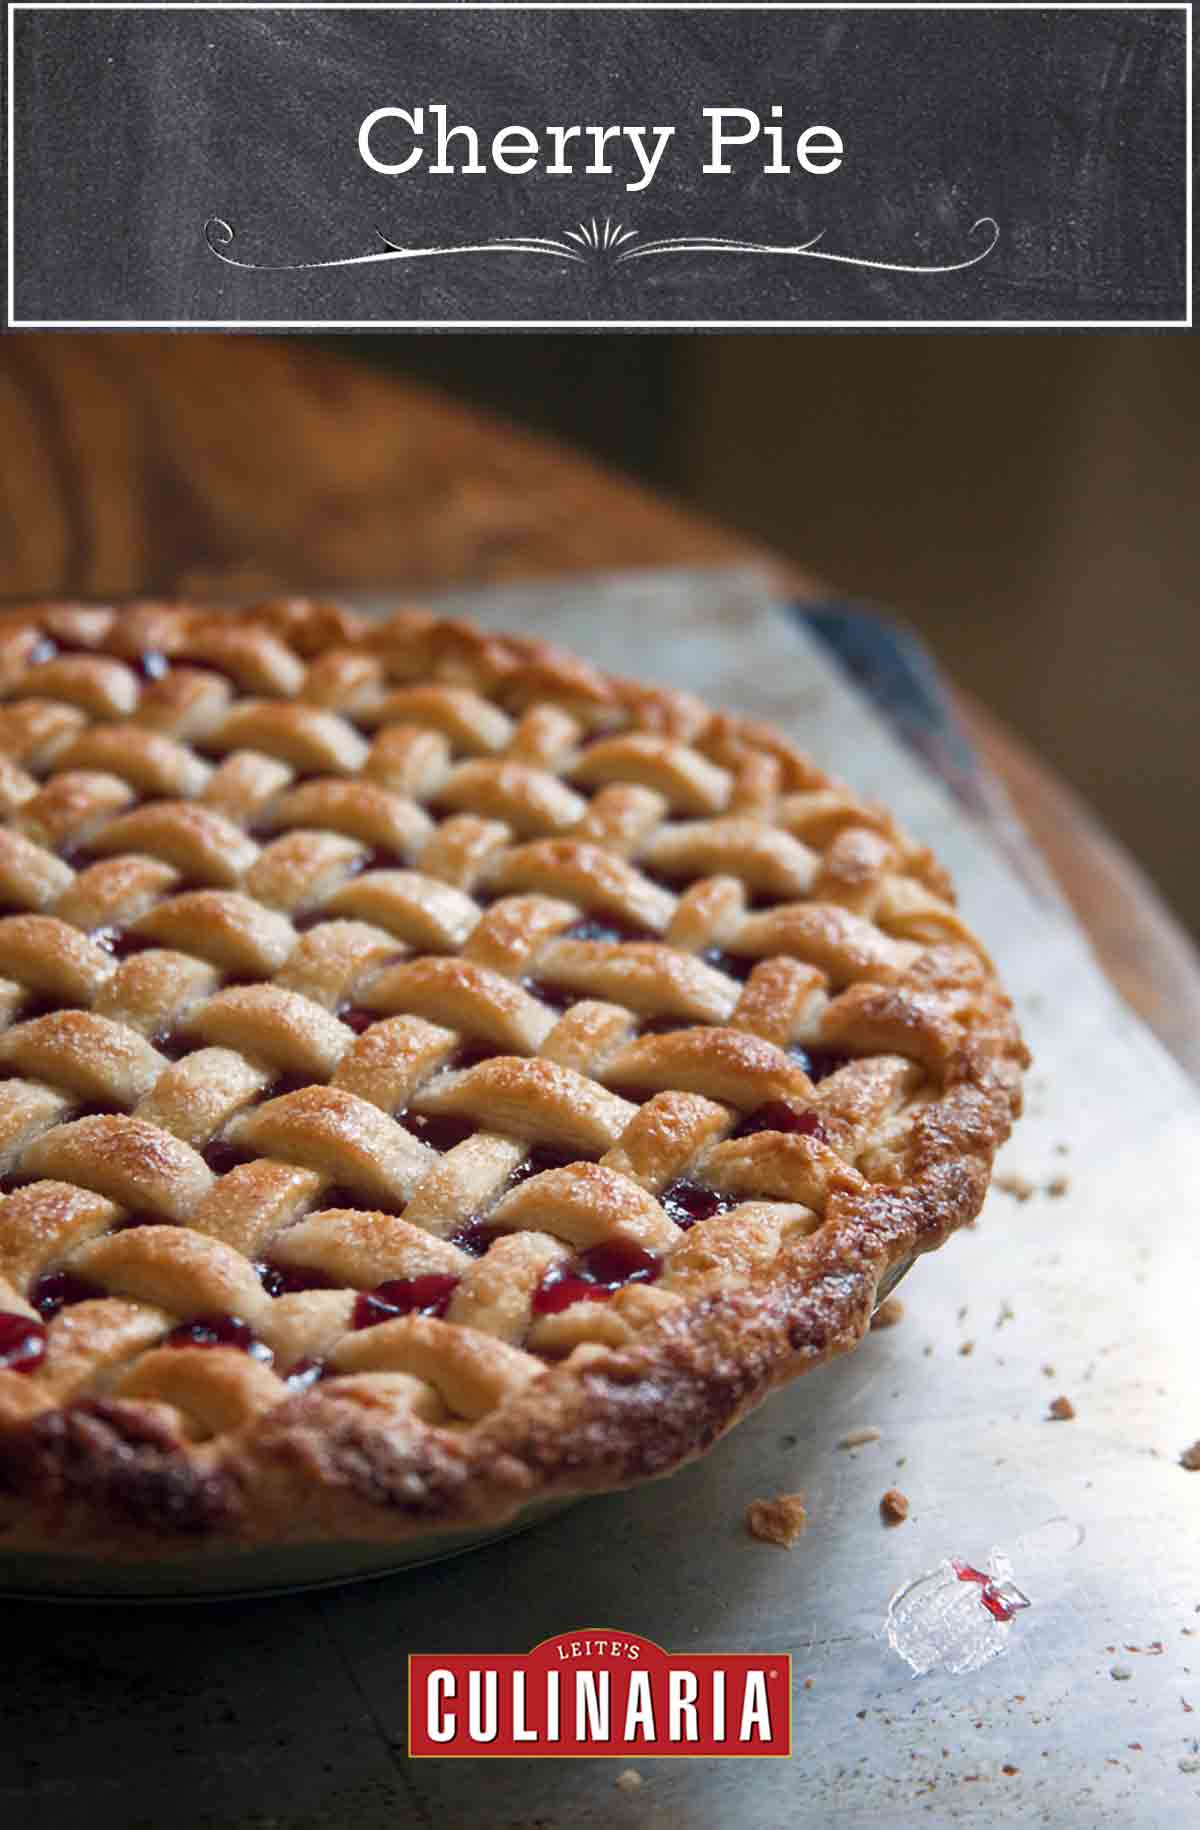 A whole sweet cherry pie with a lattice crust on a baking sheet on a wood table.